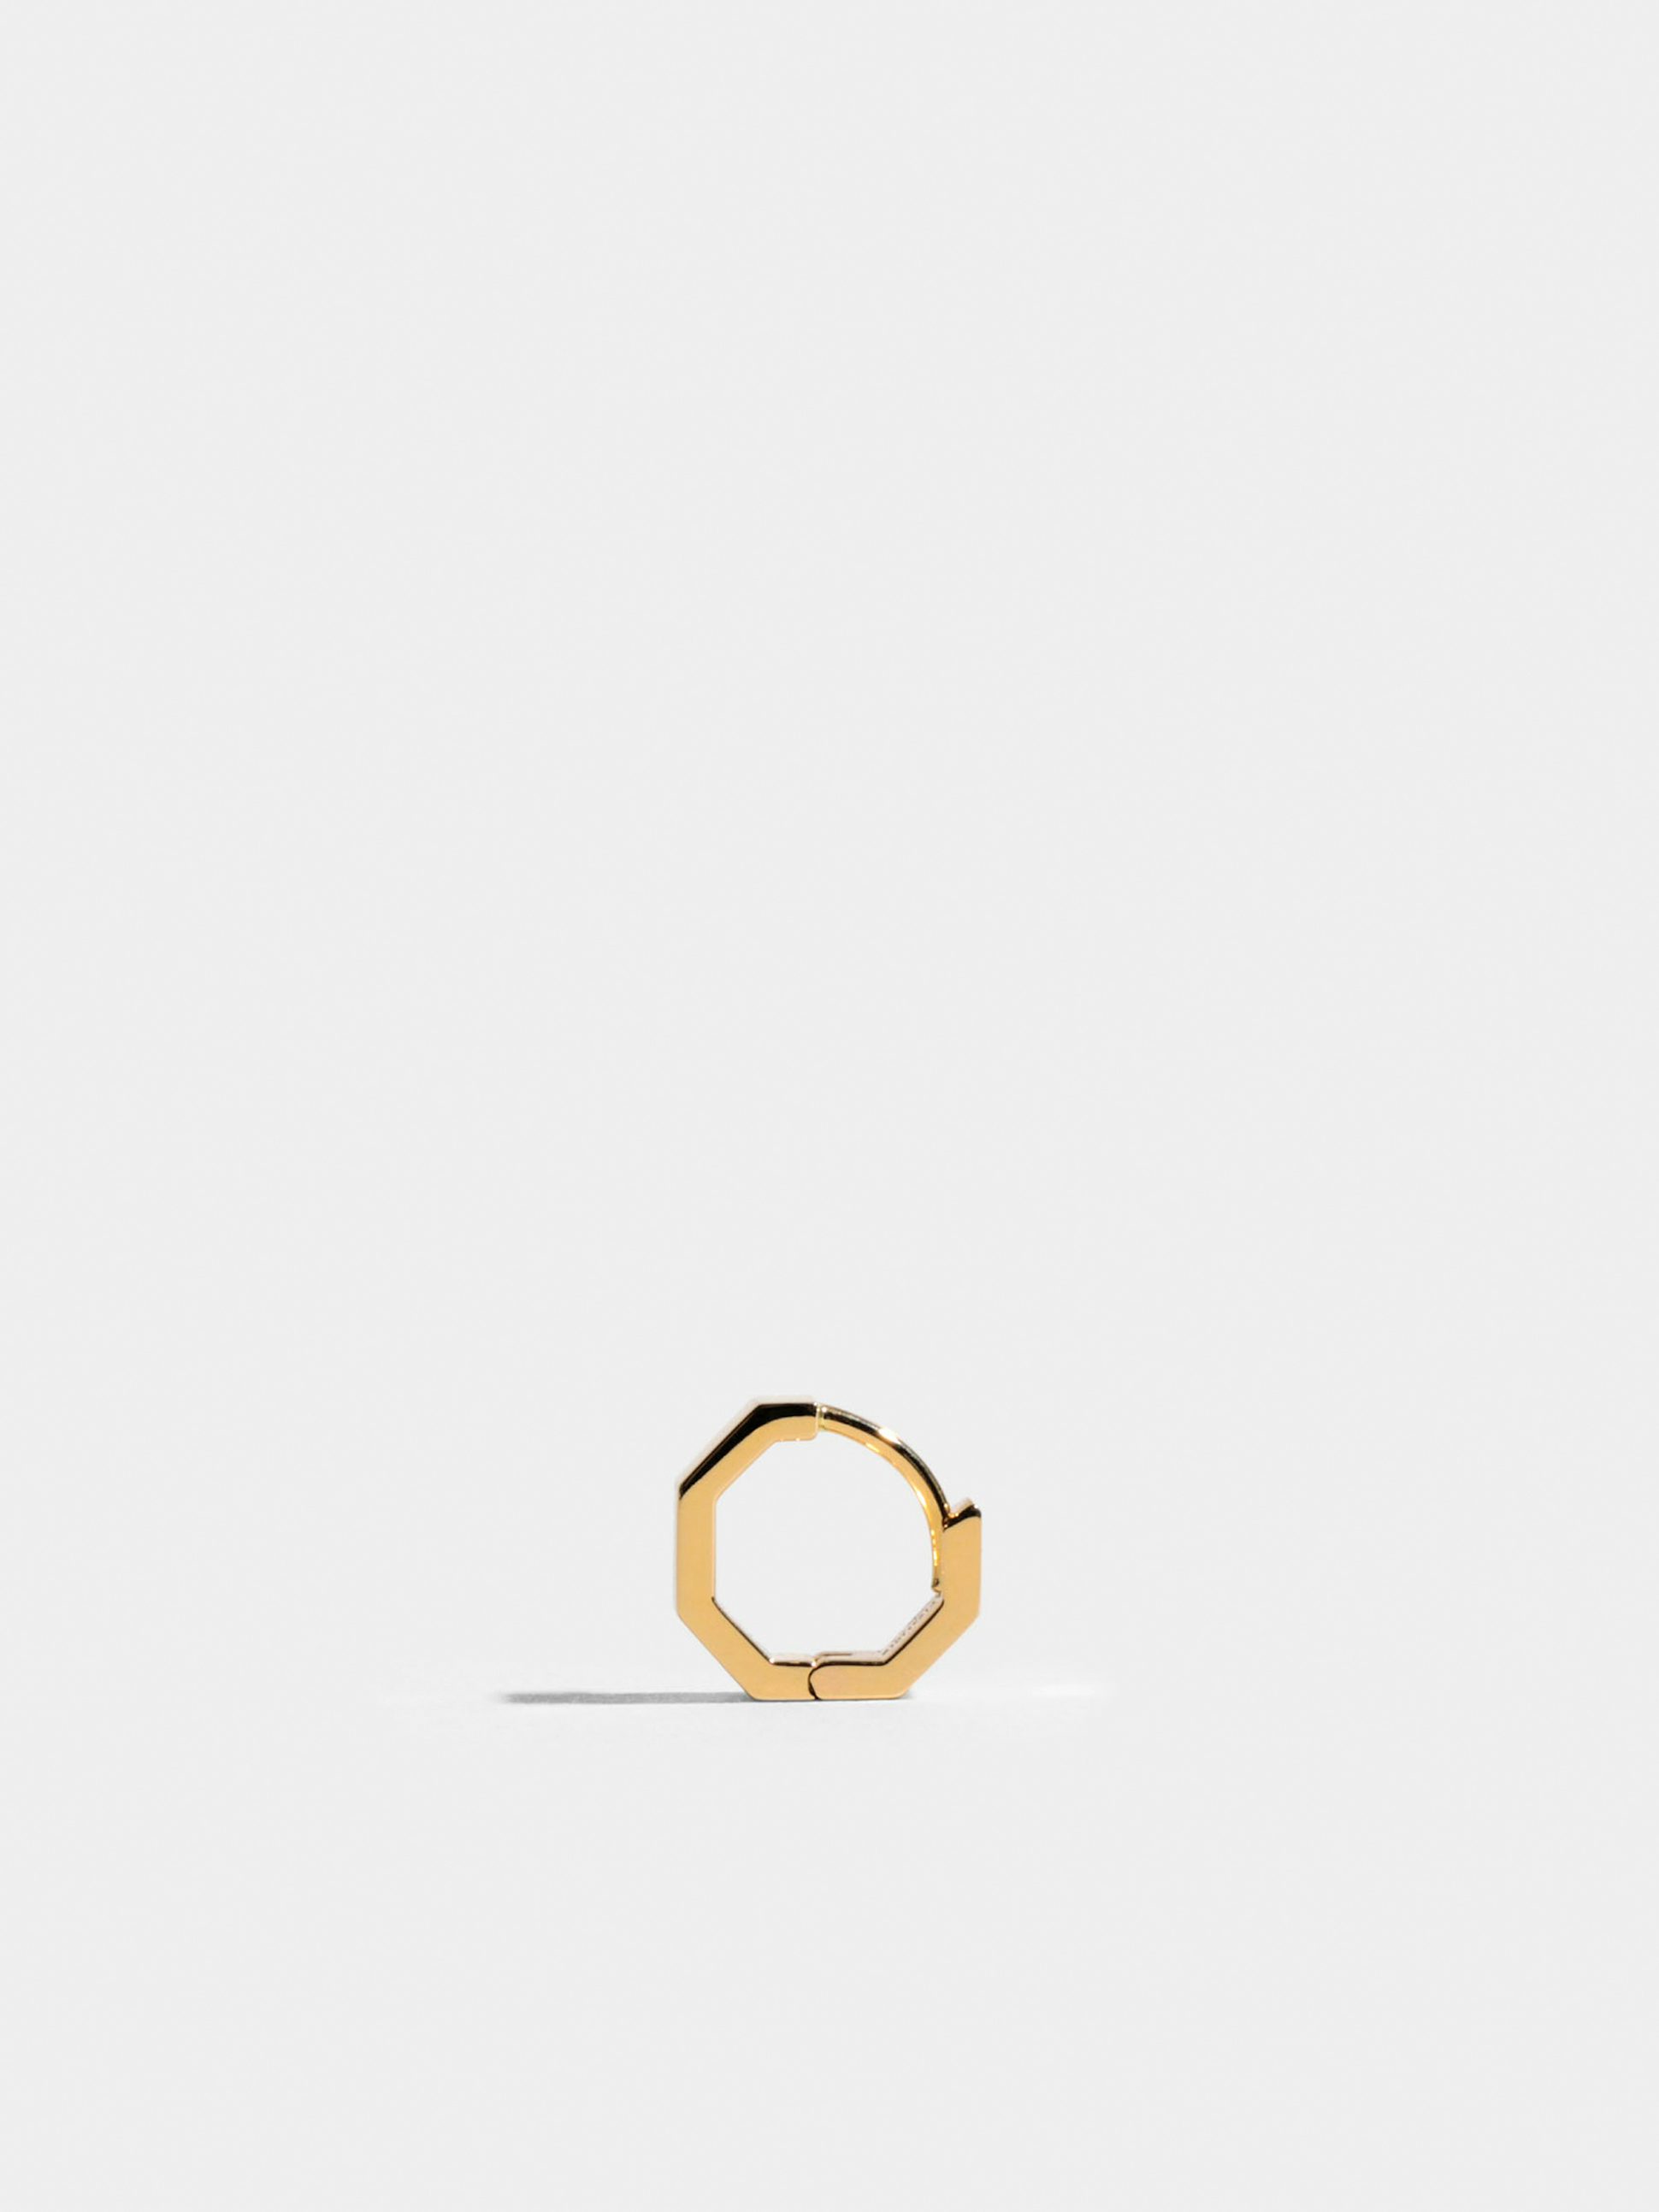 Octogone single-loop in 18k Fairmined ethical yellow gold, the unity.